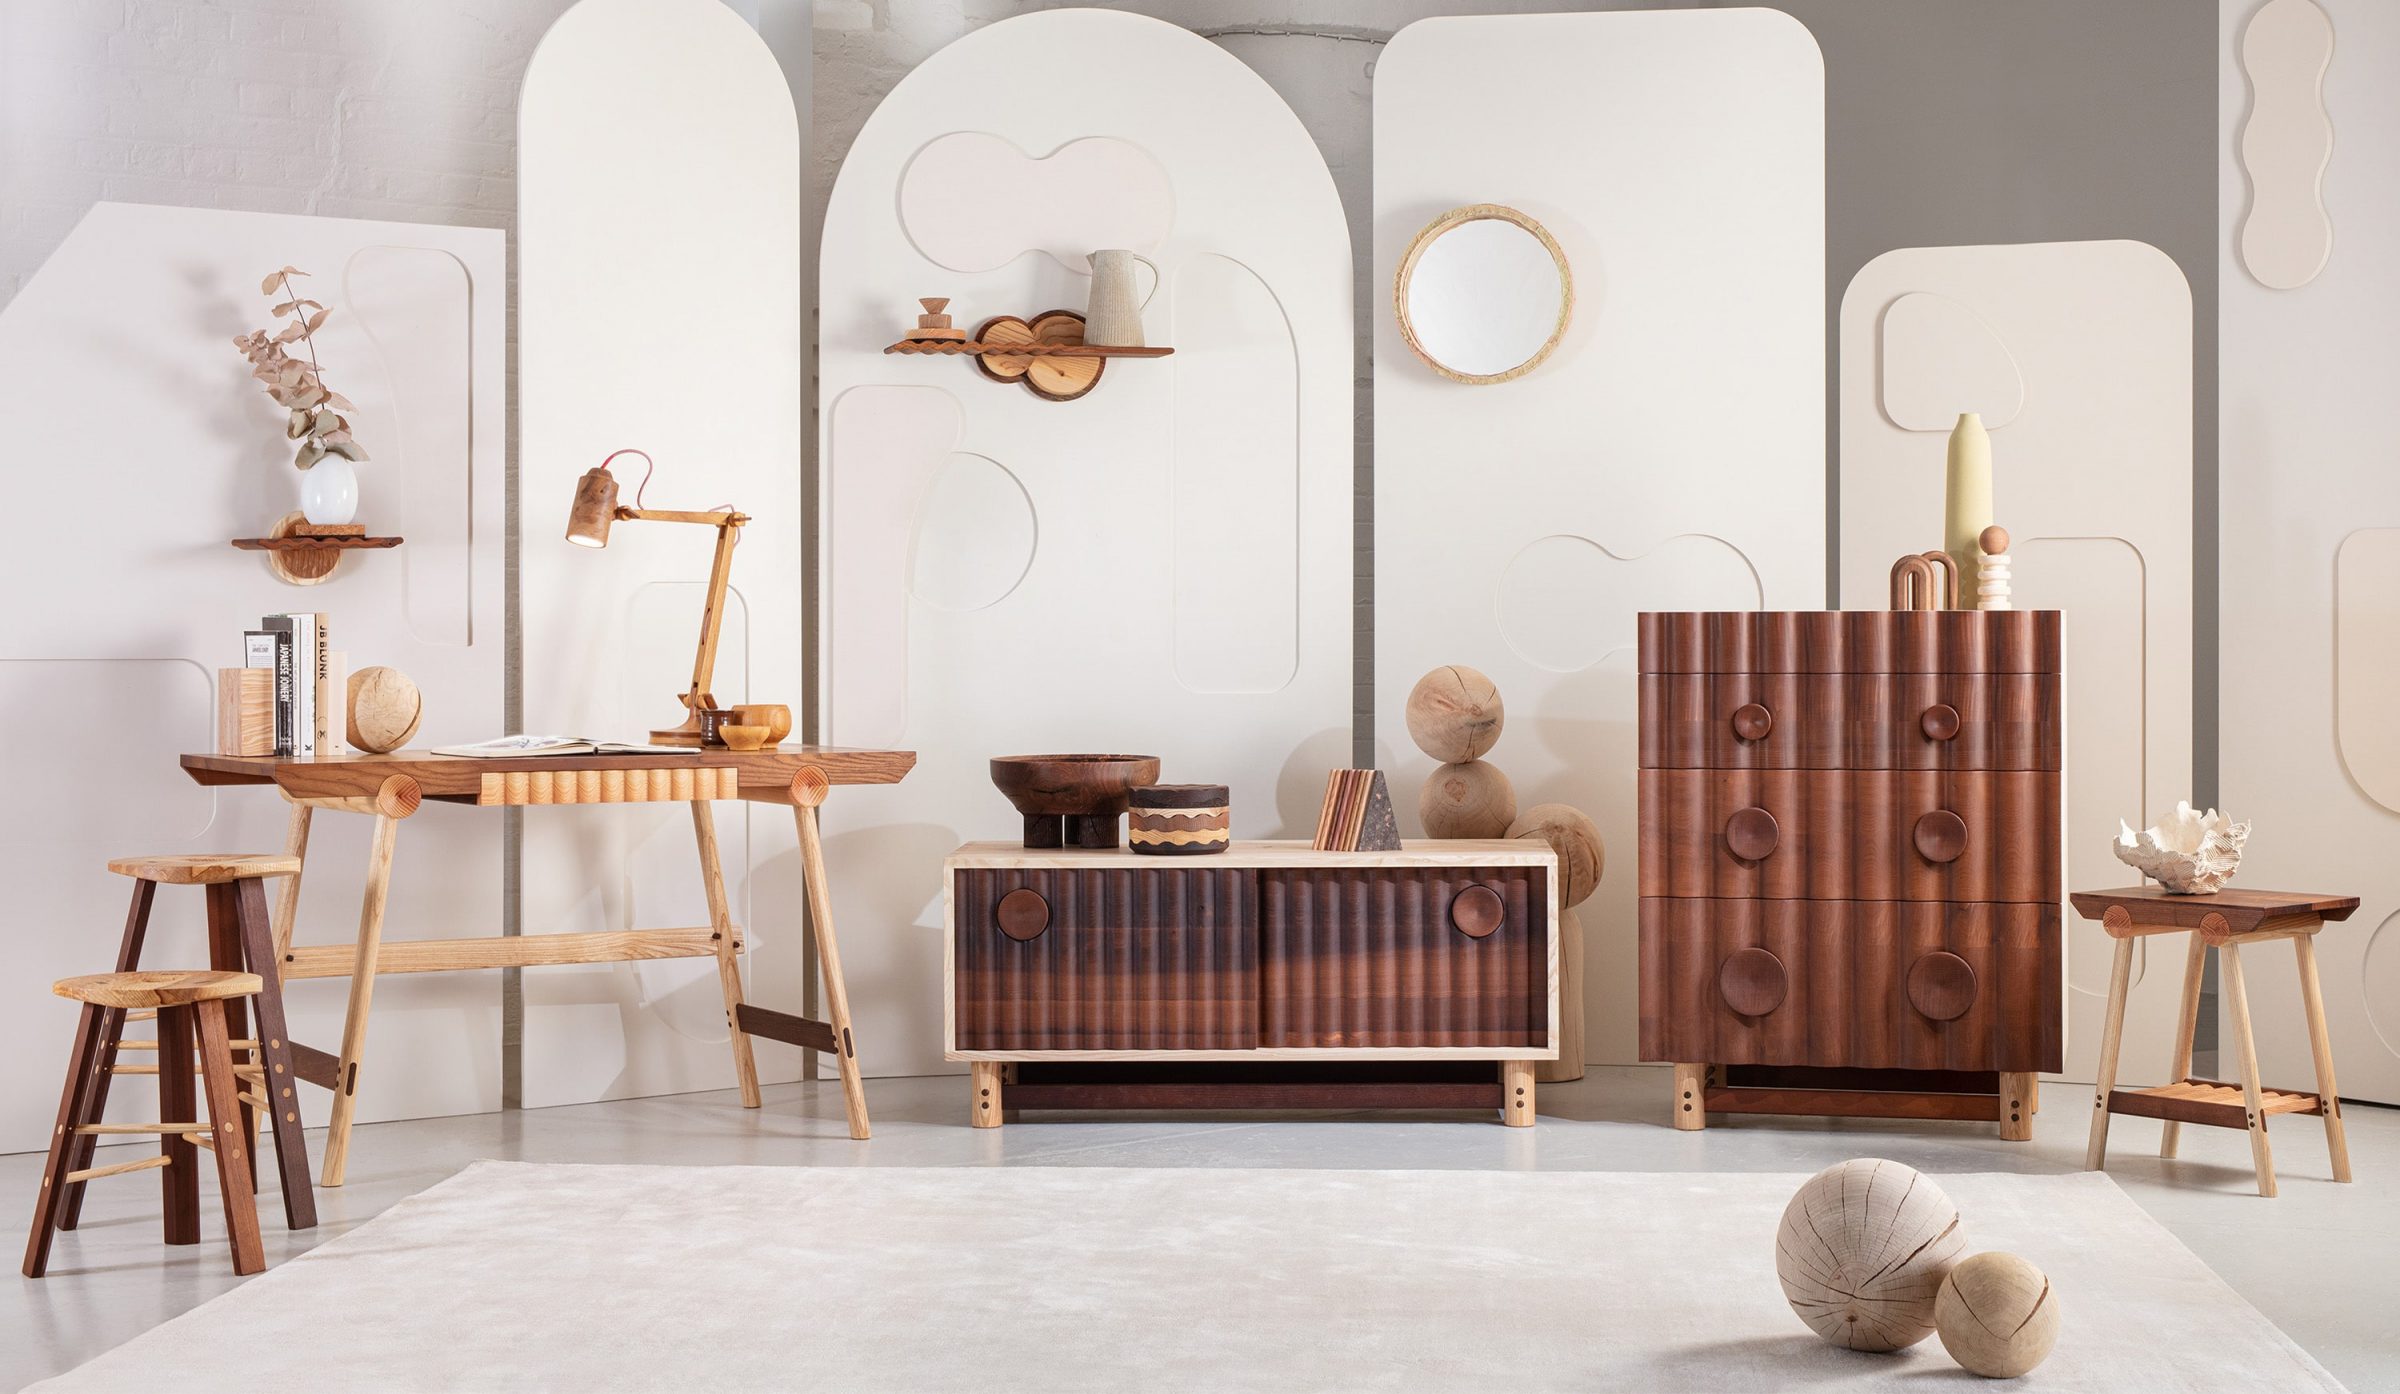 Jan Hendzel Studio Bowater range new collection with english baked ash and sycamore2 crop 5-min